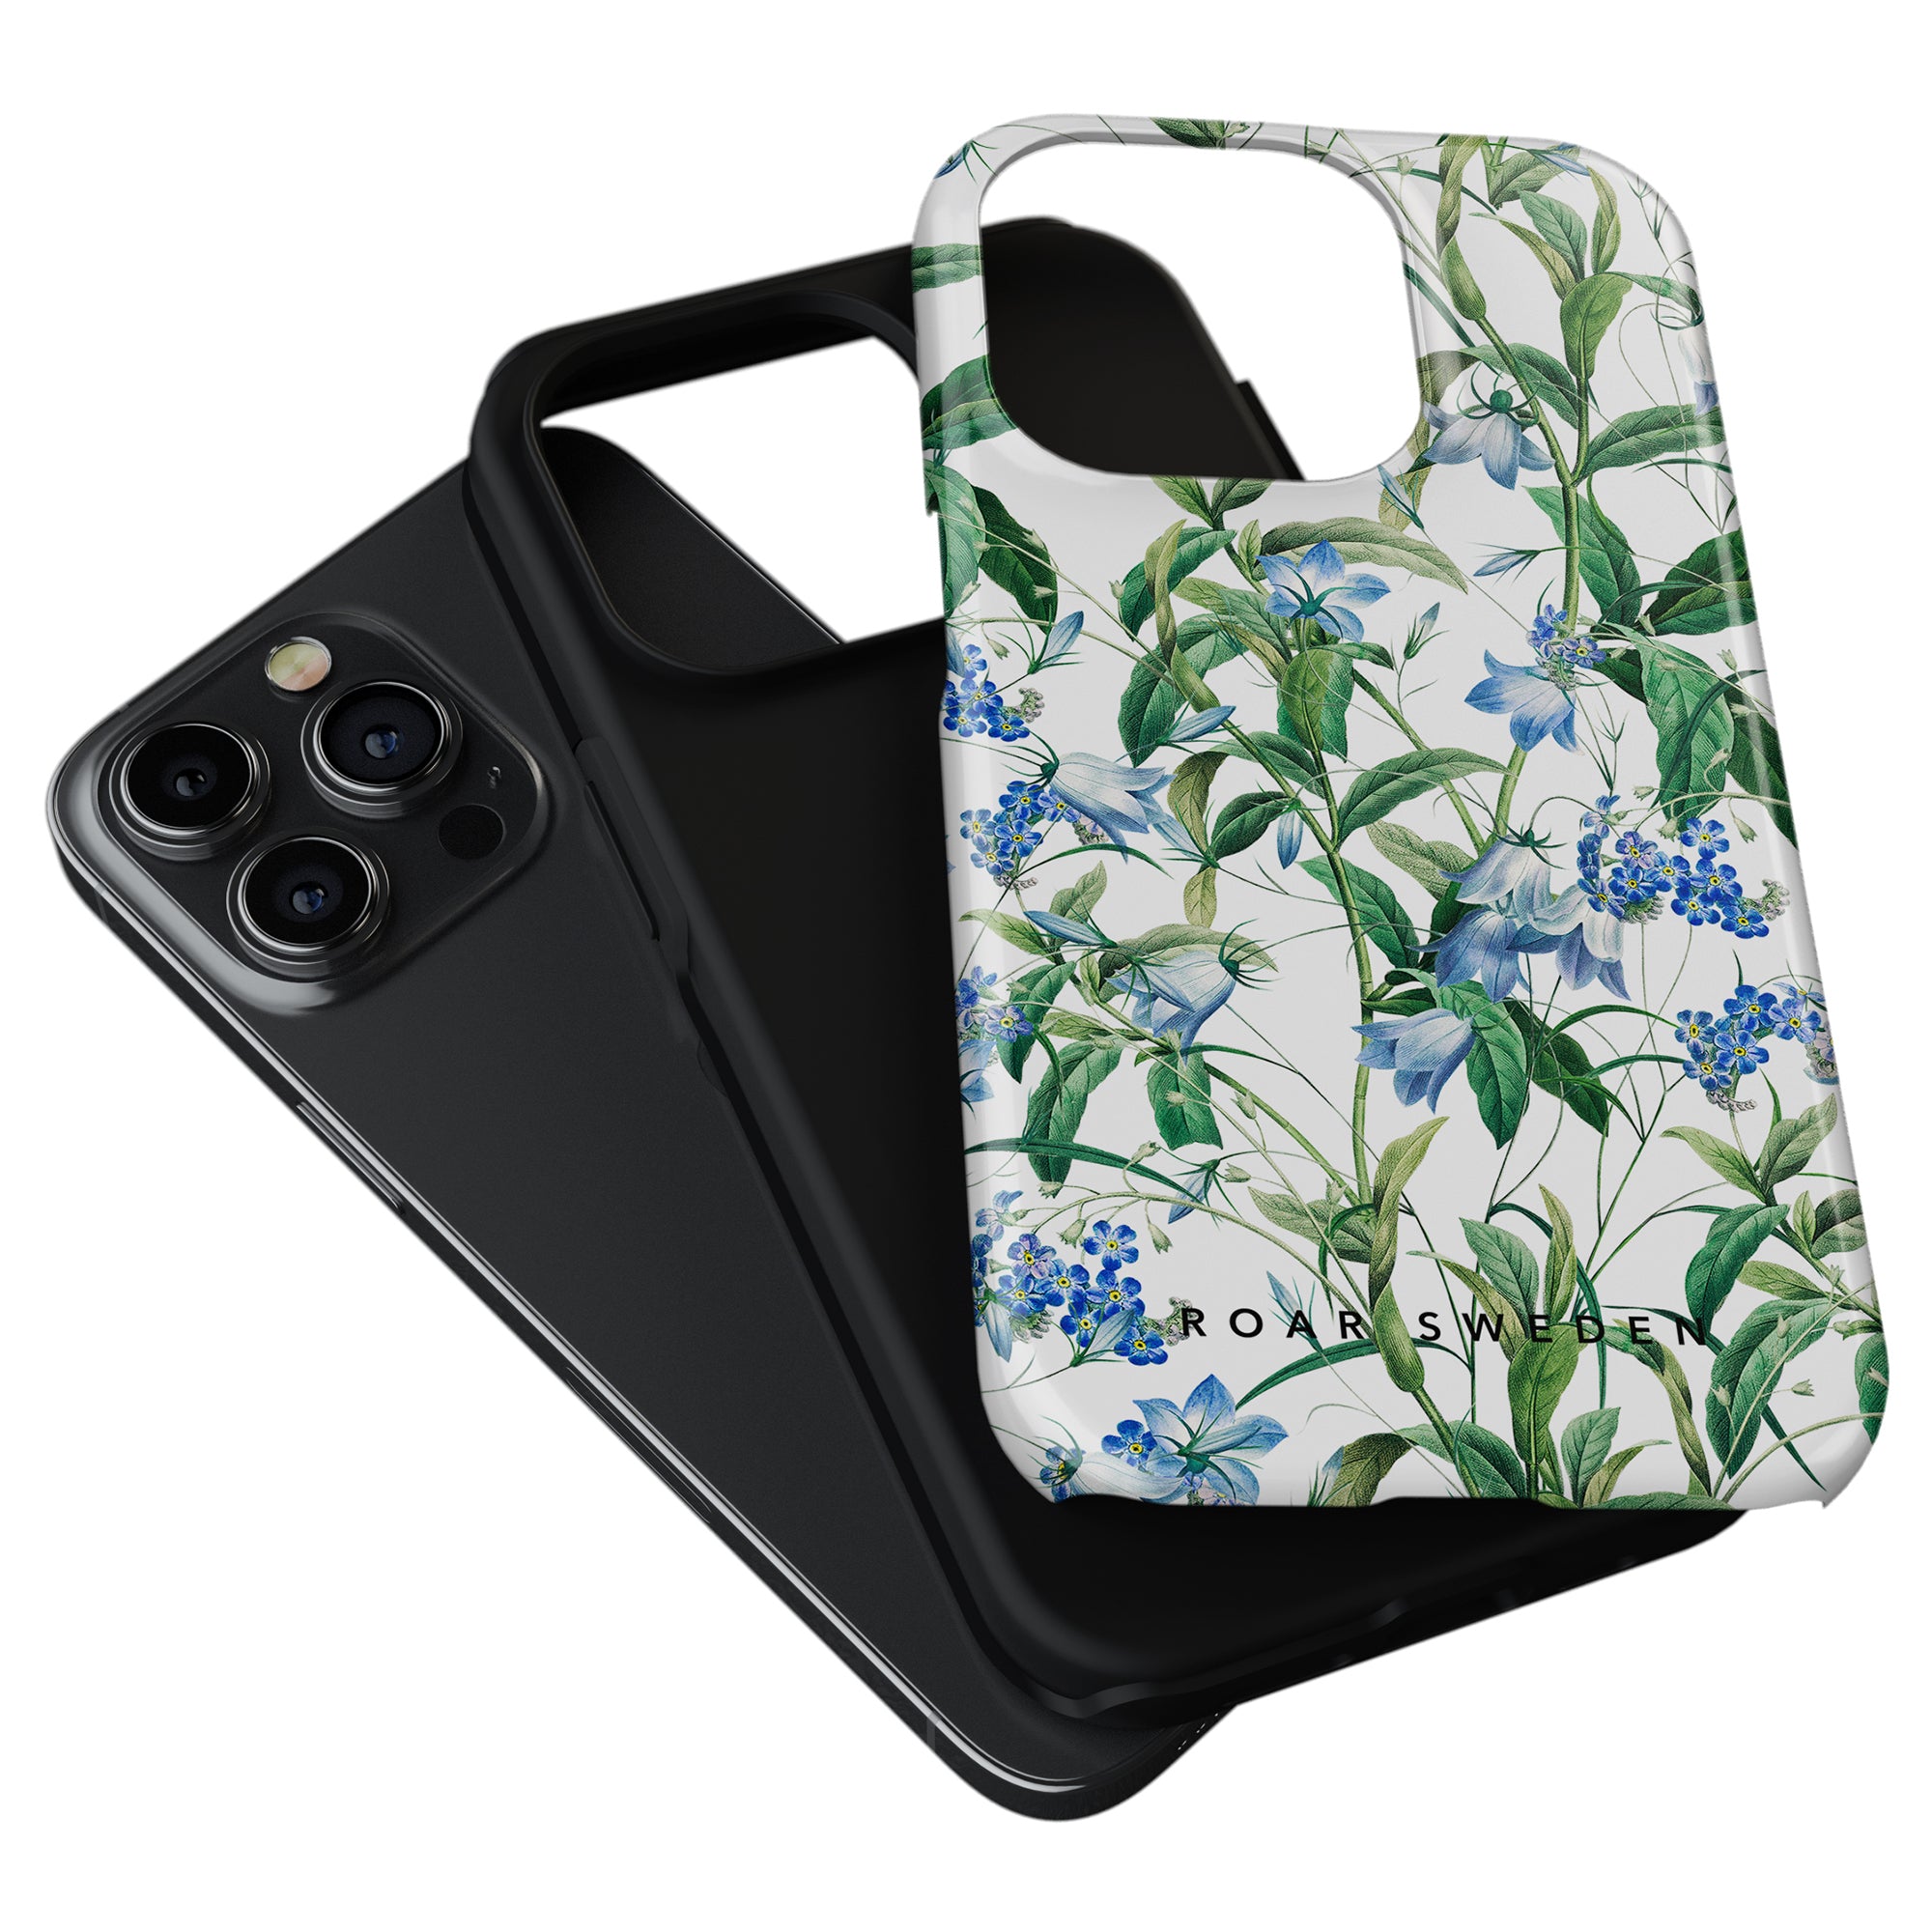 Two Blue Bells - Tough Cases, one floral print and one solid black, both featuring a cutout for camera lenses and designed with an exfoliating texture to enhance grip.